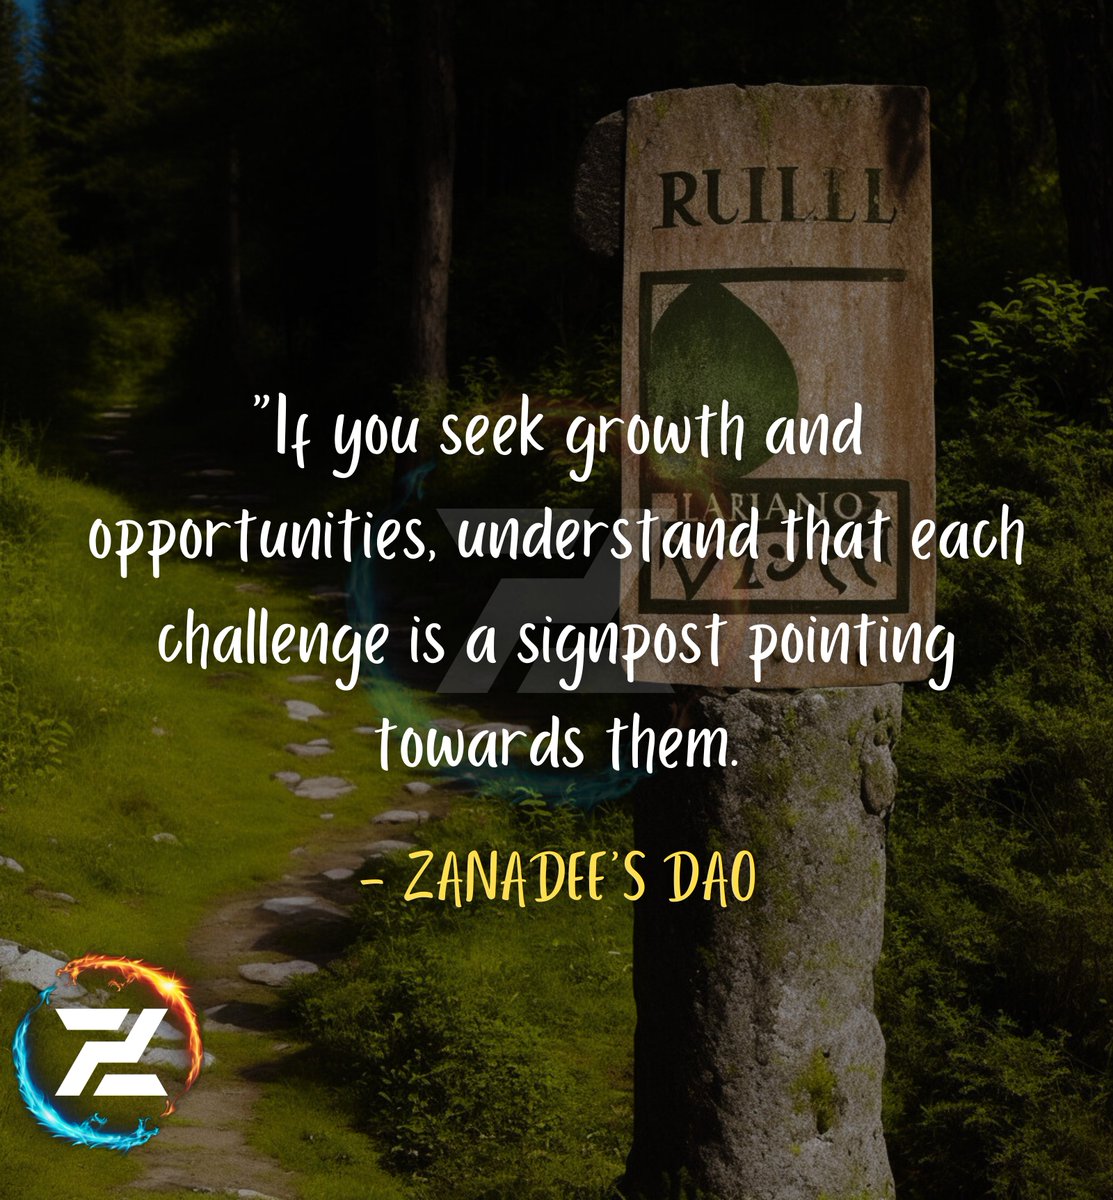 Signposts of Growth

“If you seek growth and opportunities, understand that each challenge is a signpost pointing towards them.

#ContemplateLife #SelfGrowth #Spirituality #LearnFromFailures #Success

Zanadee’s Dao